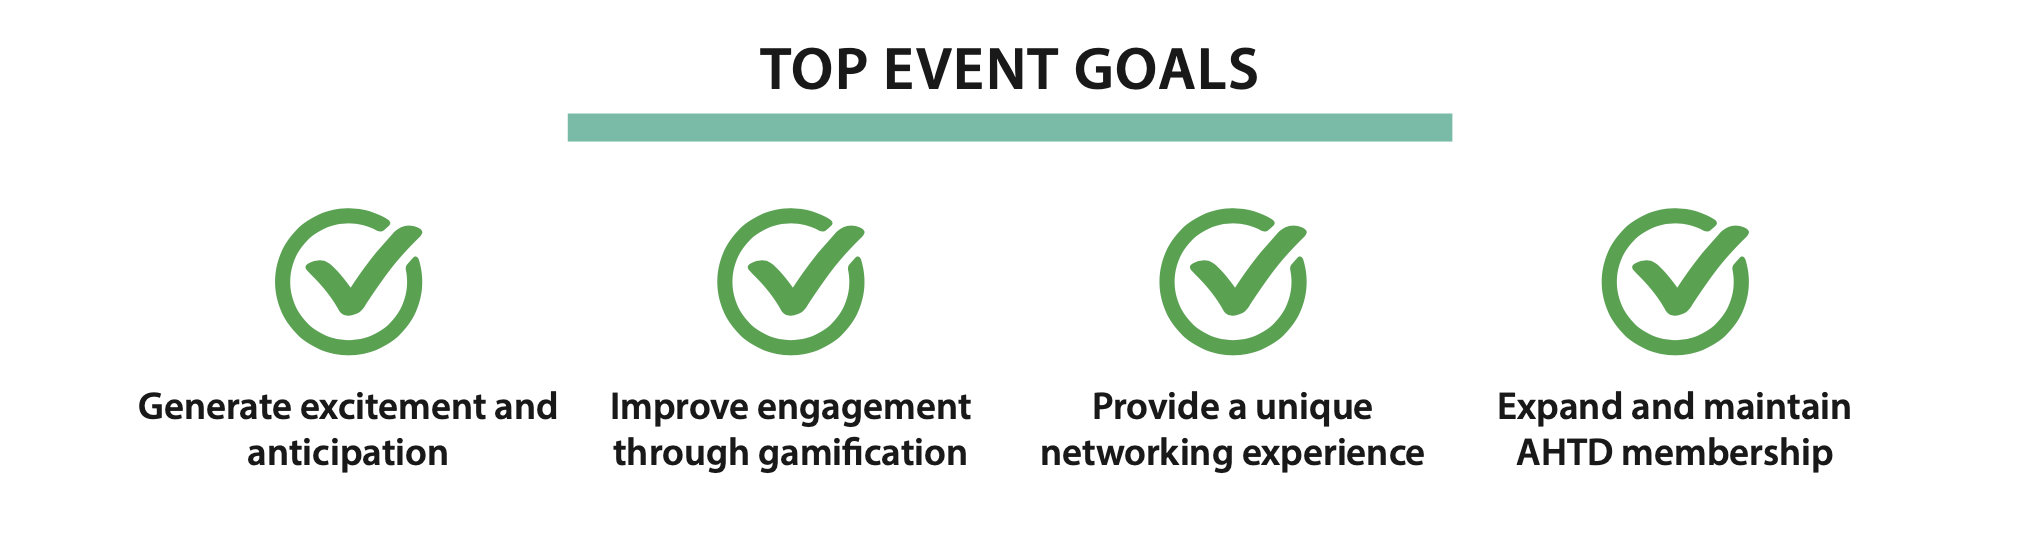 Top Event Goals: Generate excitement and anticipation, improve engagement through gamification, provide a unique networking experience, expand and maintain AHTD membership